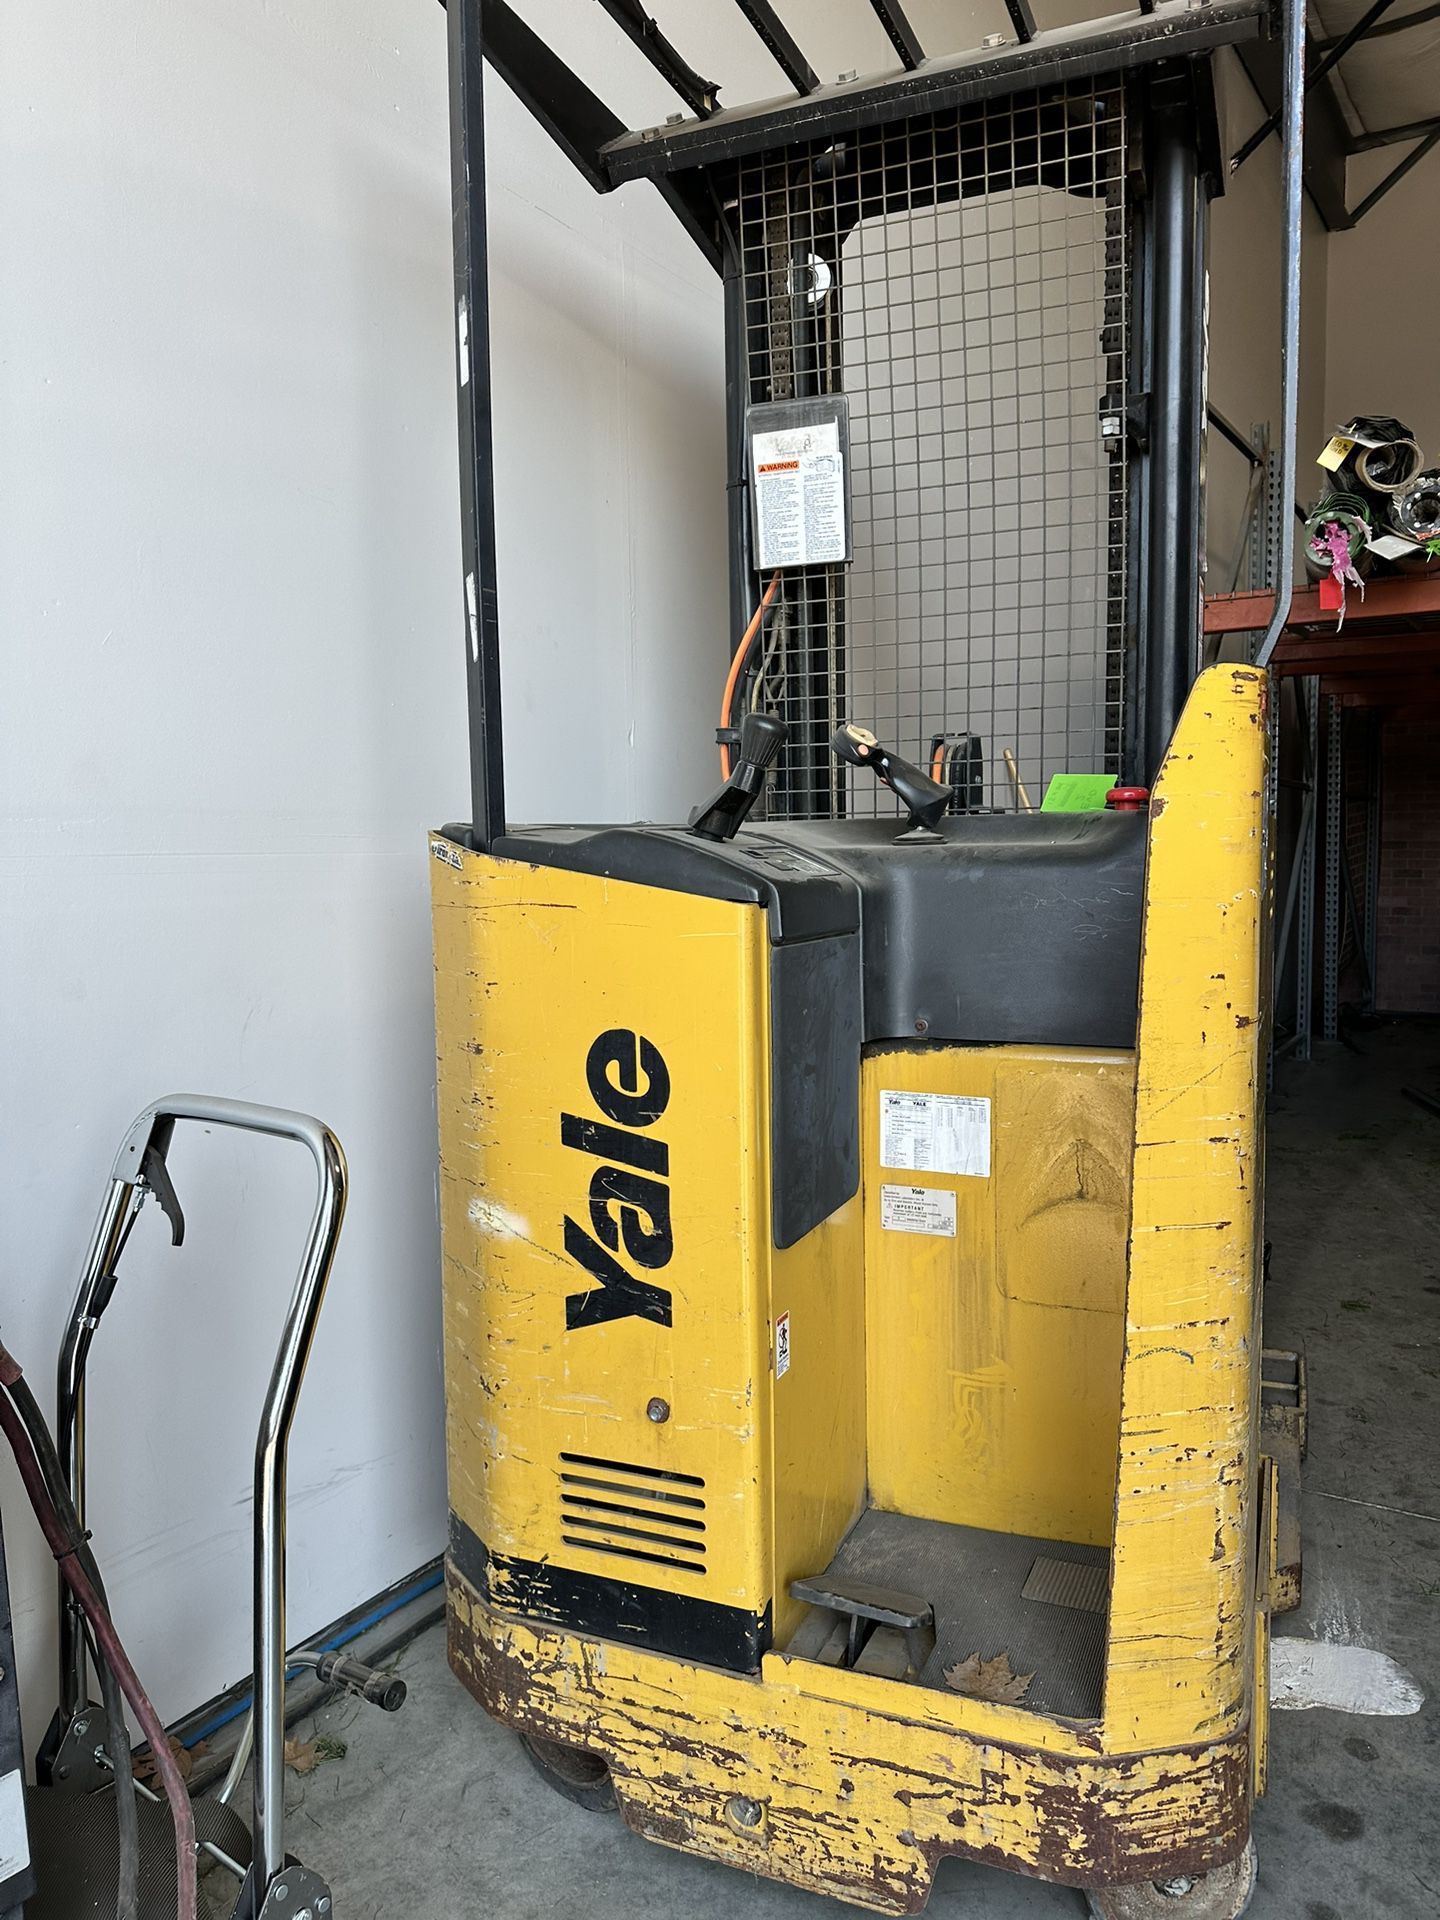 Yale Electric Forklift 